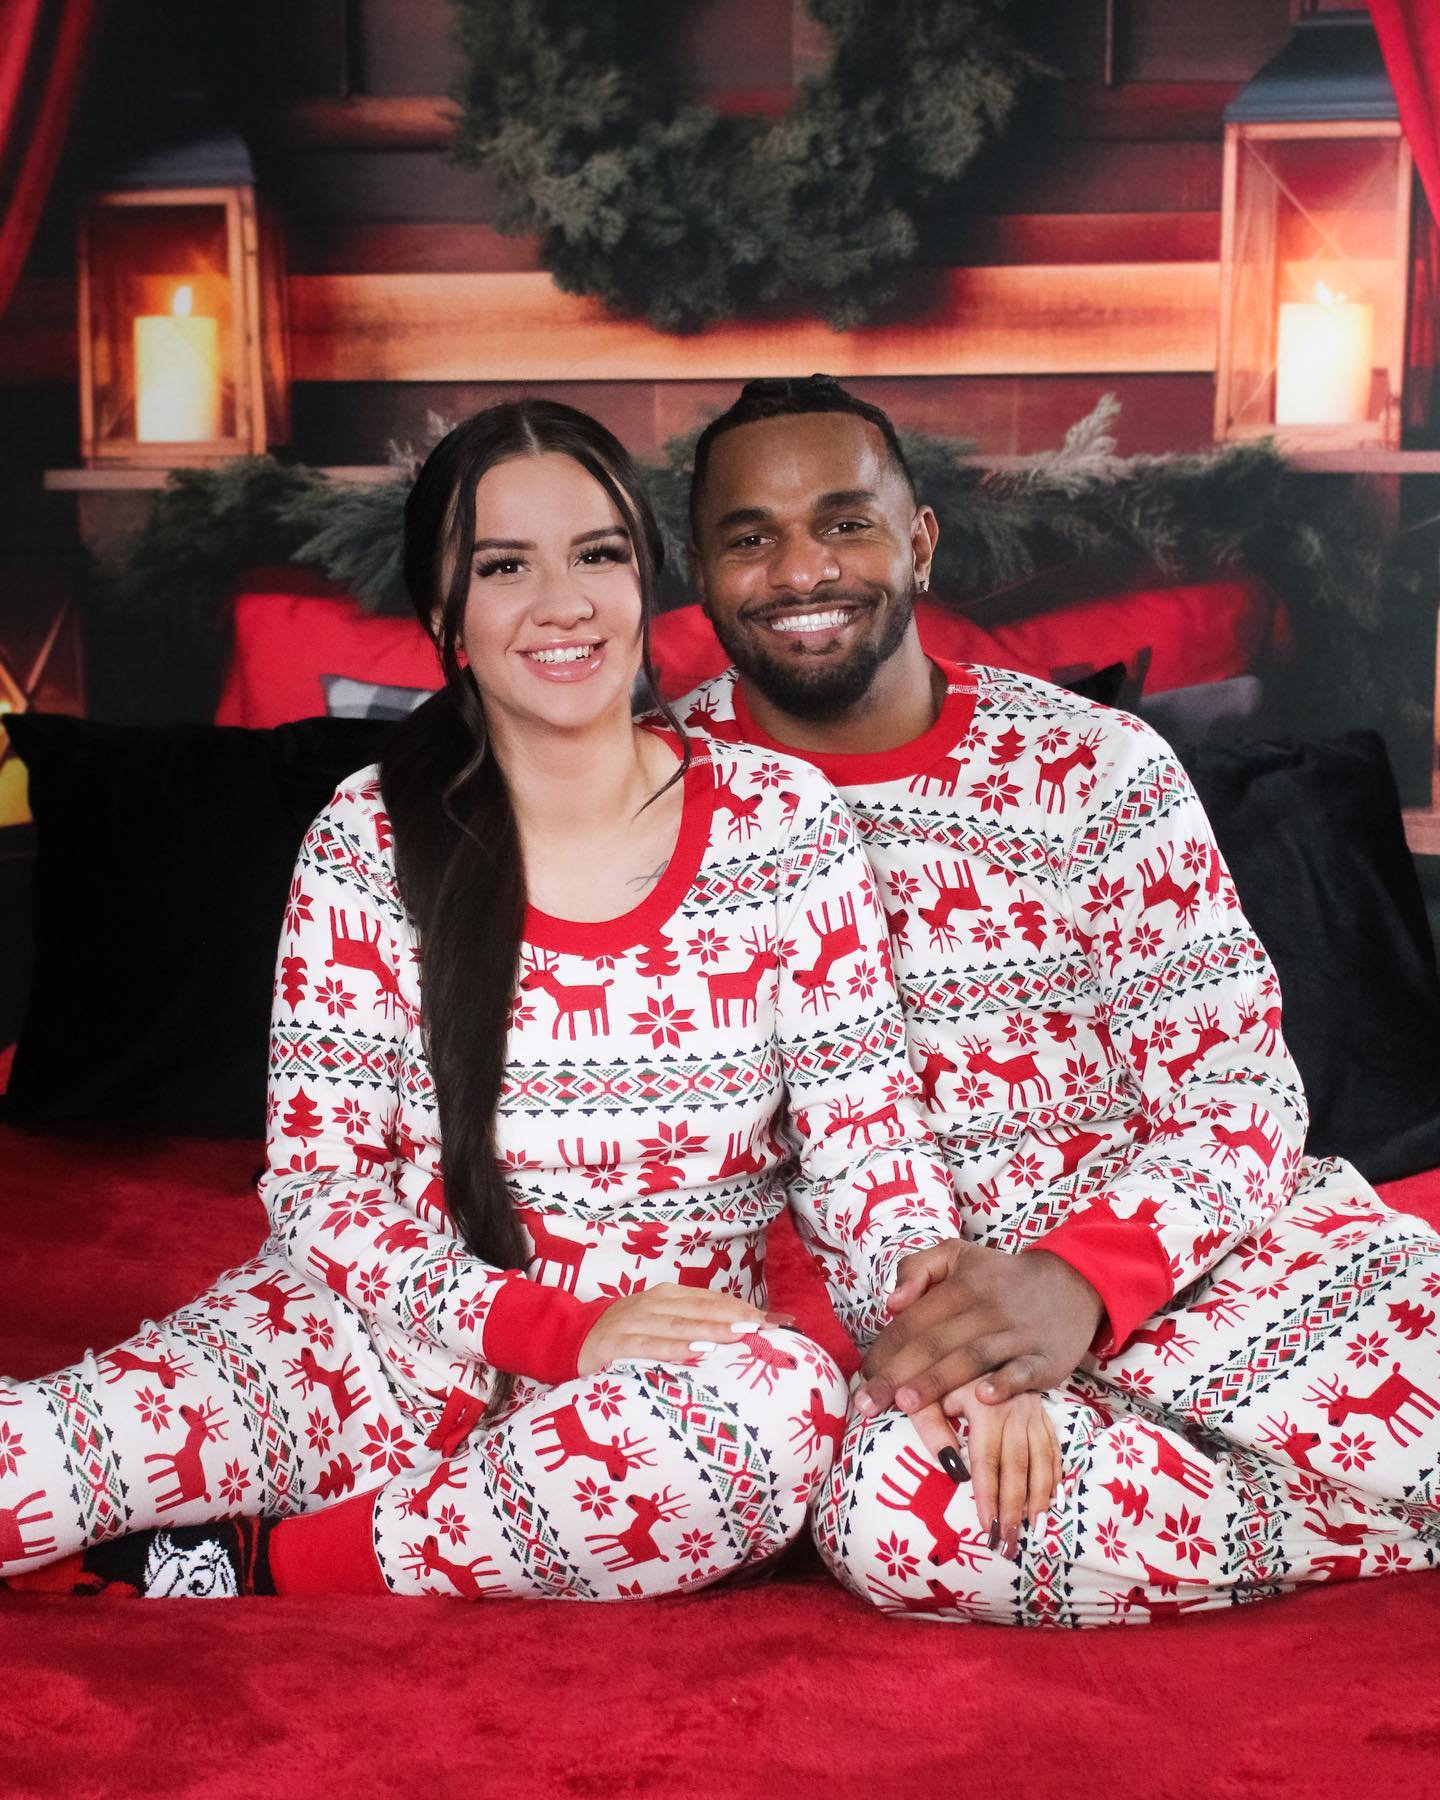 Chatter surrounding her possible pregnancy first started last month when Kayla posted photos from a Christmas shoot with a mystery man